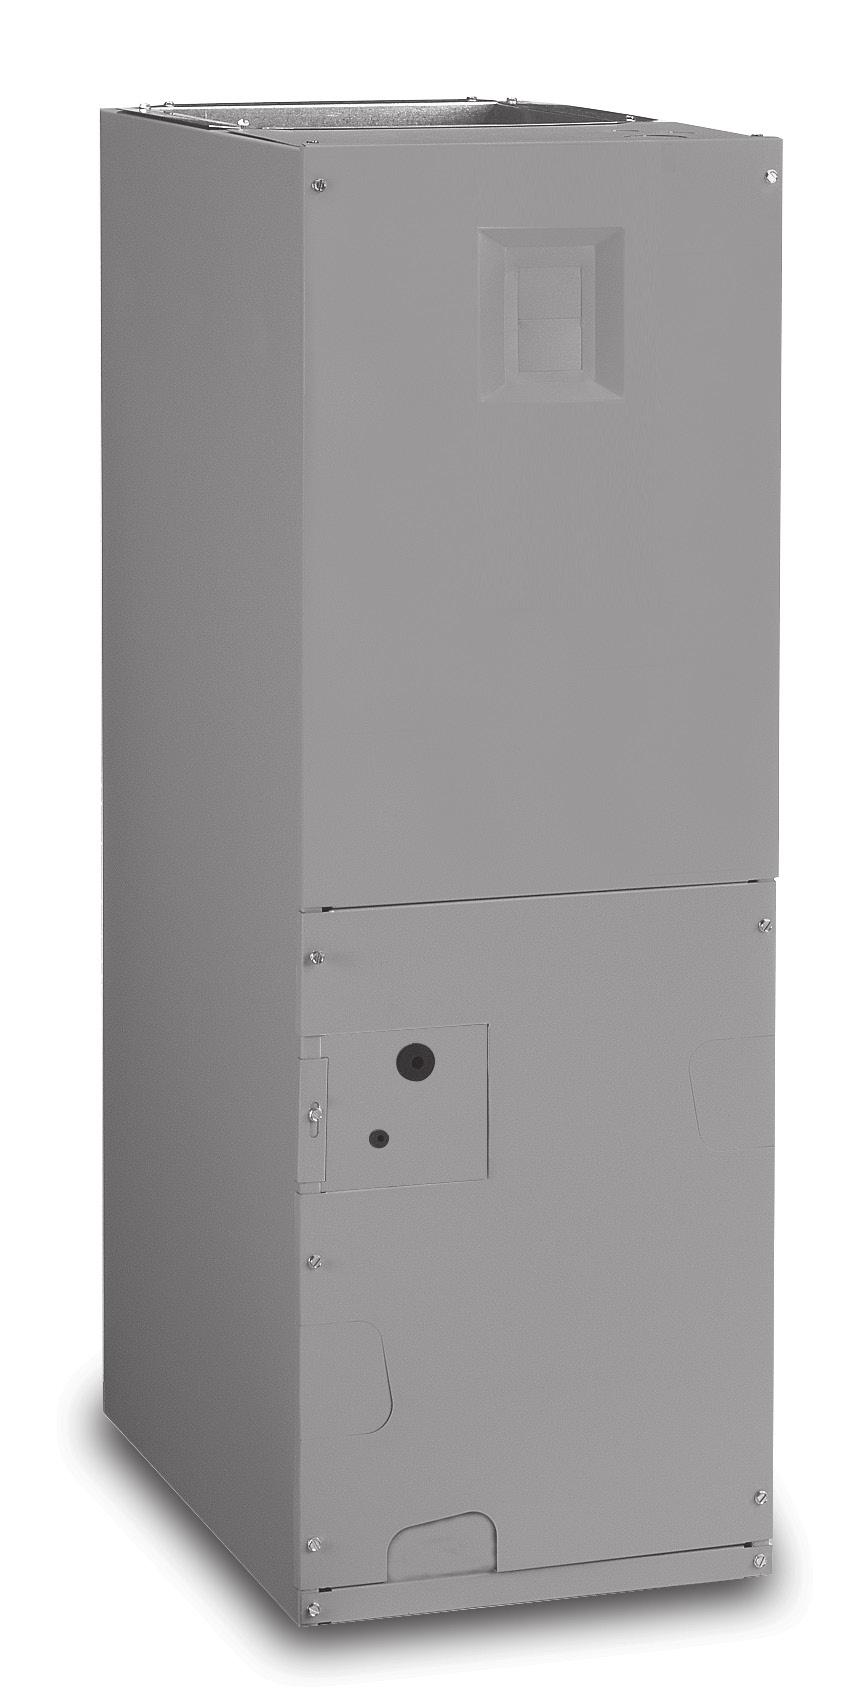 TECHNICAL SPECIFICATIONS 6EMMX Series Air Handler with TXV 14-15 SEER Residential System 18,000-60,000 tuh (Heat Pump & Air Conditioner) R-410A Refrigerant The 6EMMX Series of air handlers, when